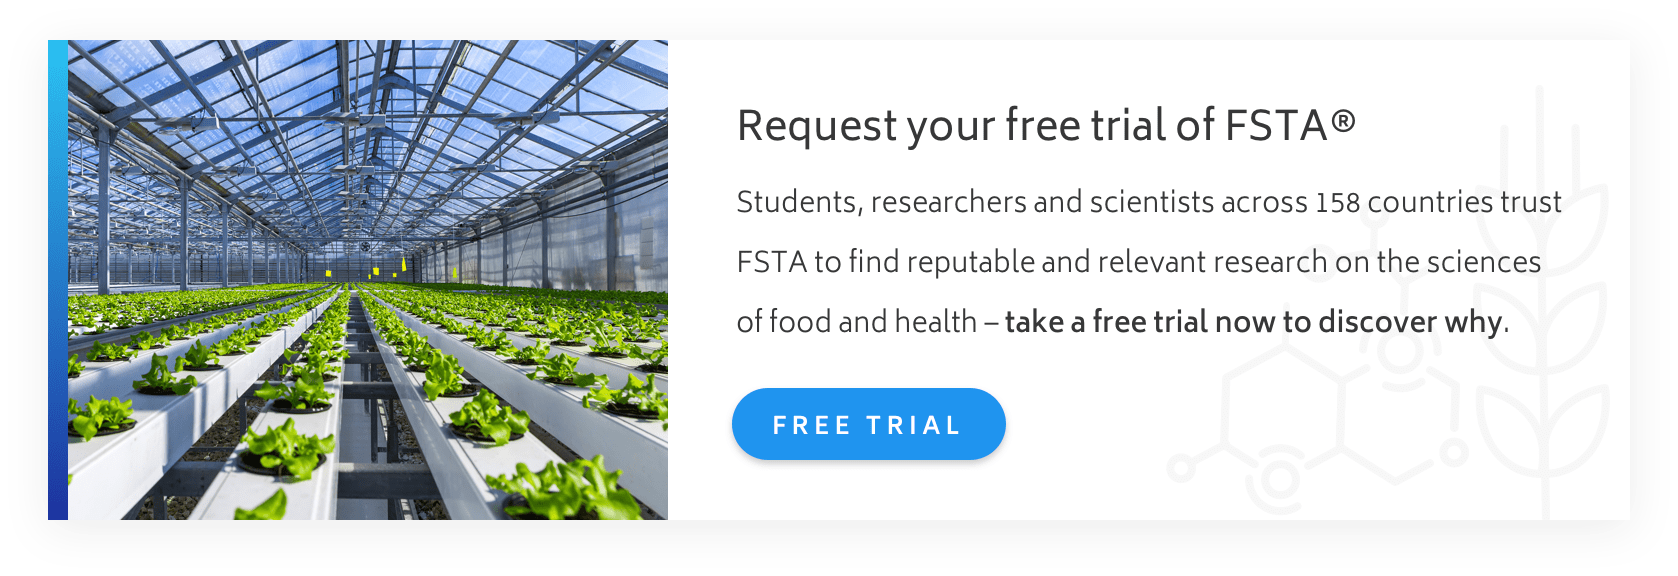 Free trial request for the FSTA database 